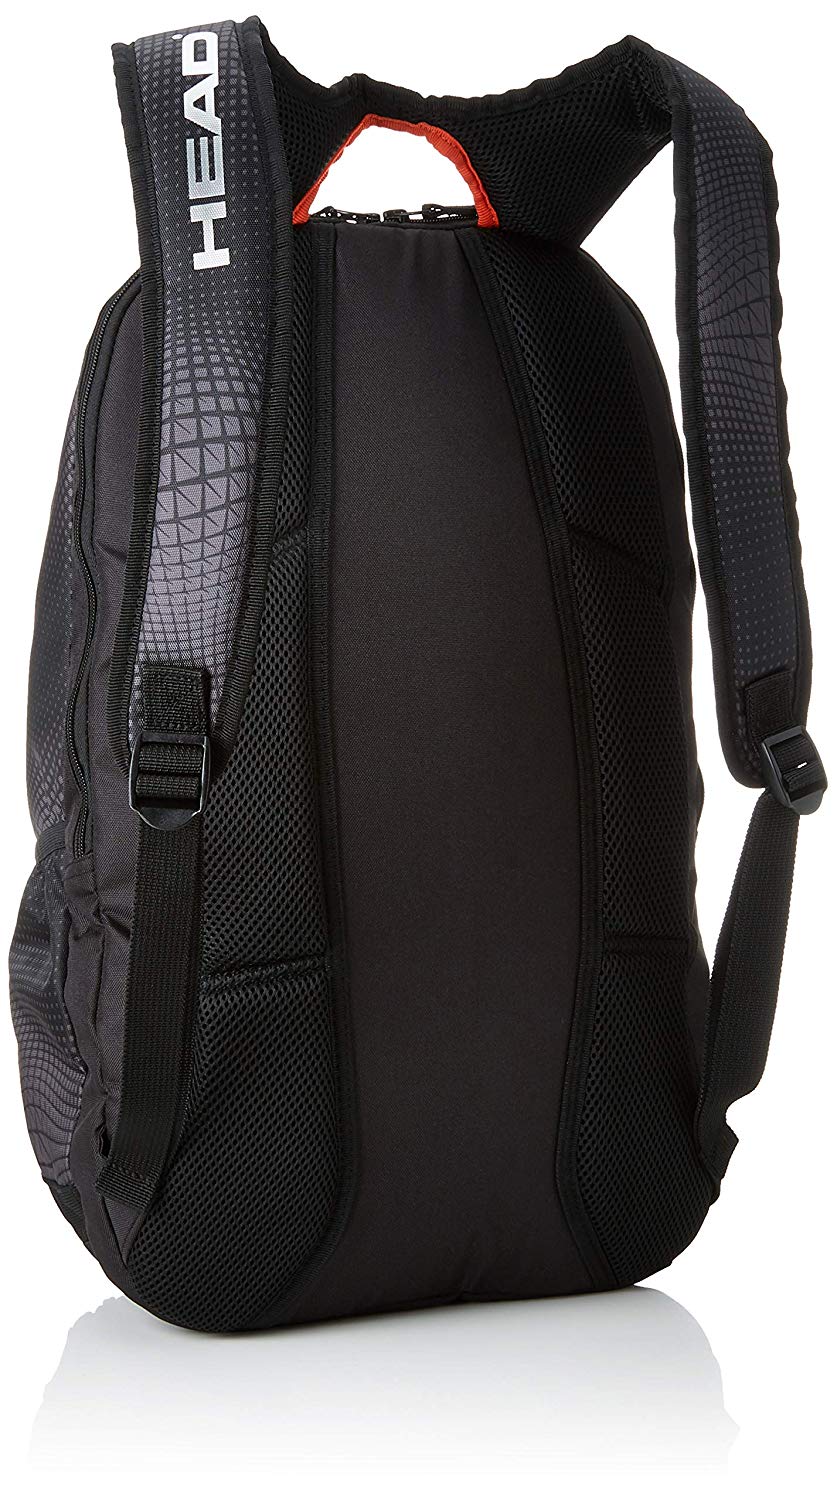 The tennis sport backpack for head brand